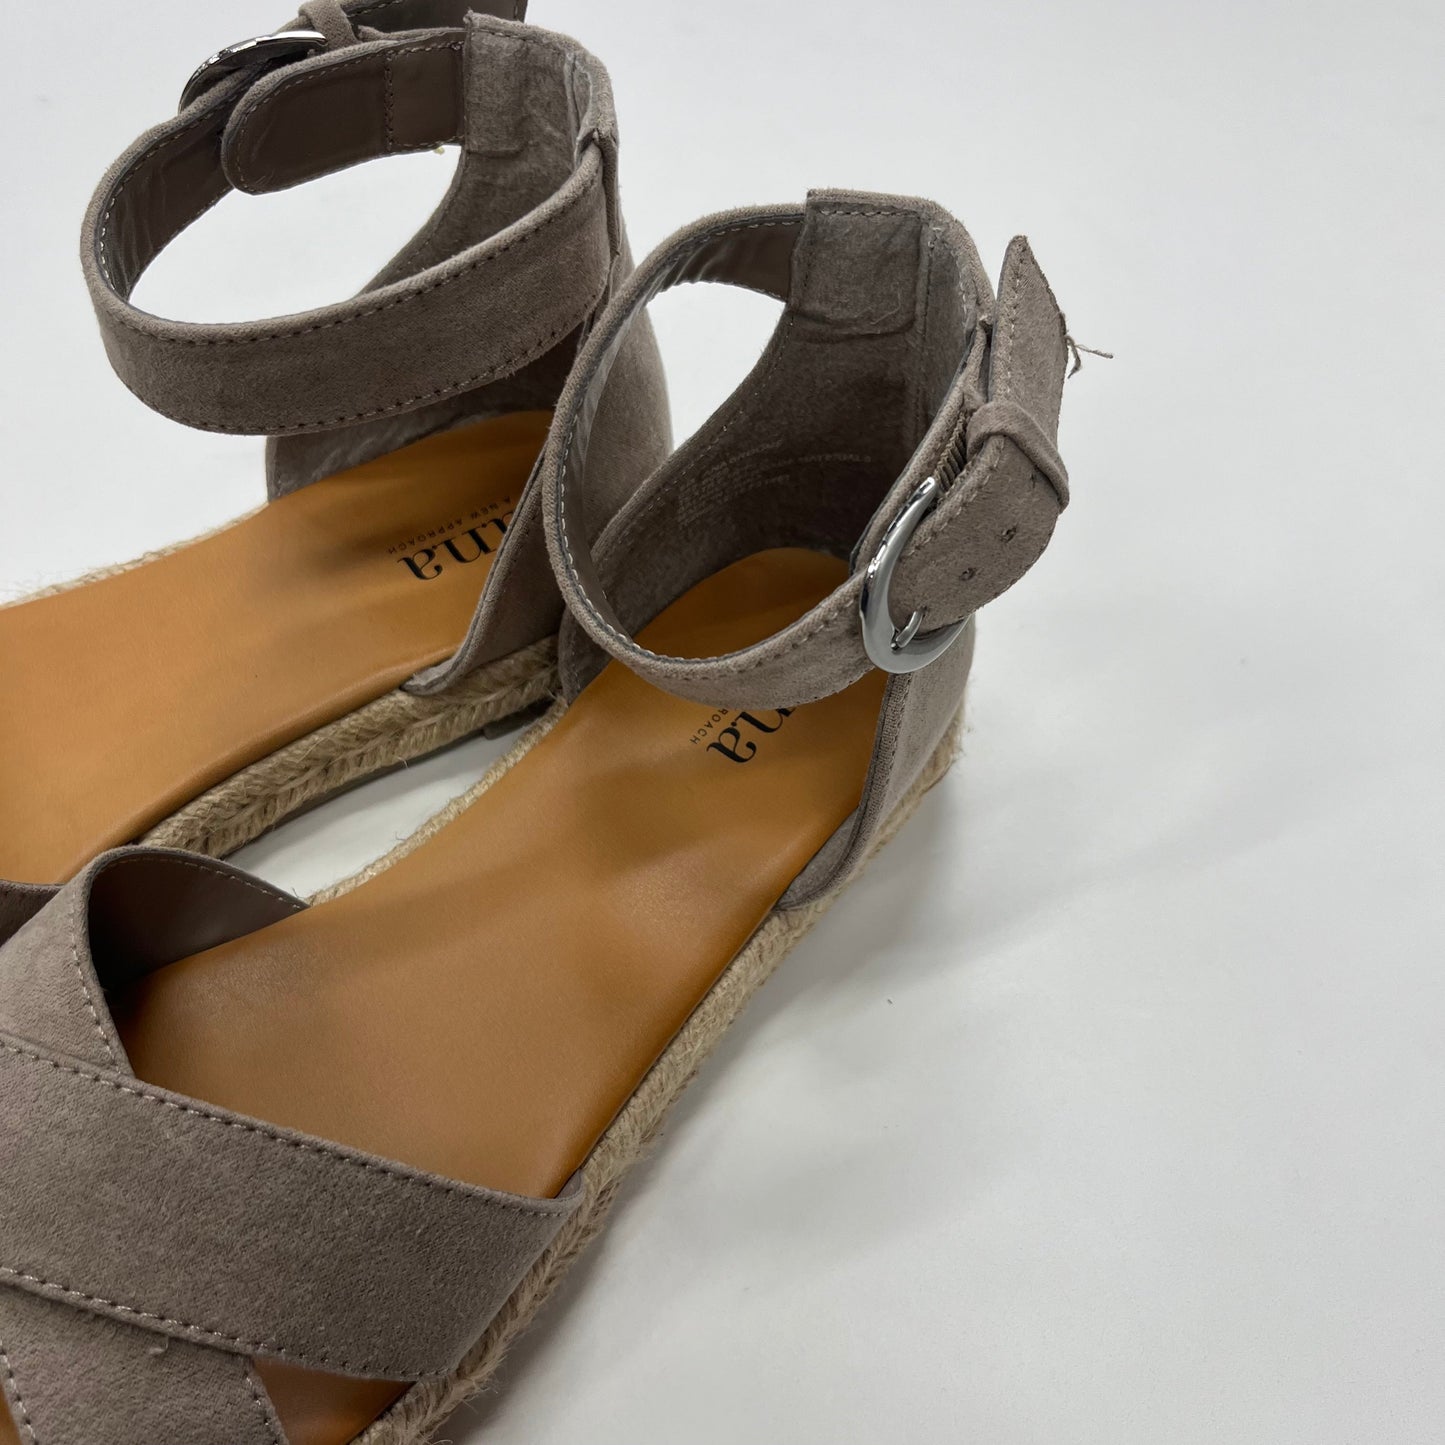 Taupe Sandals Flats Ana, Size 8